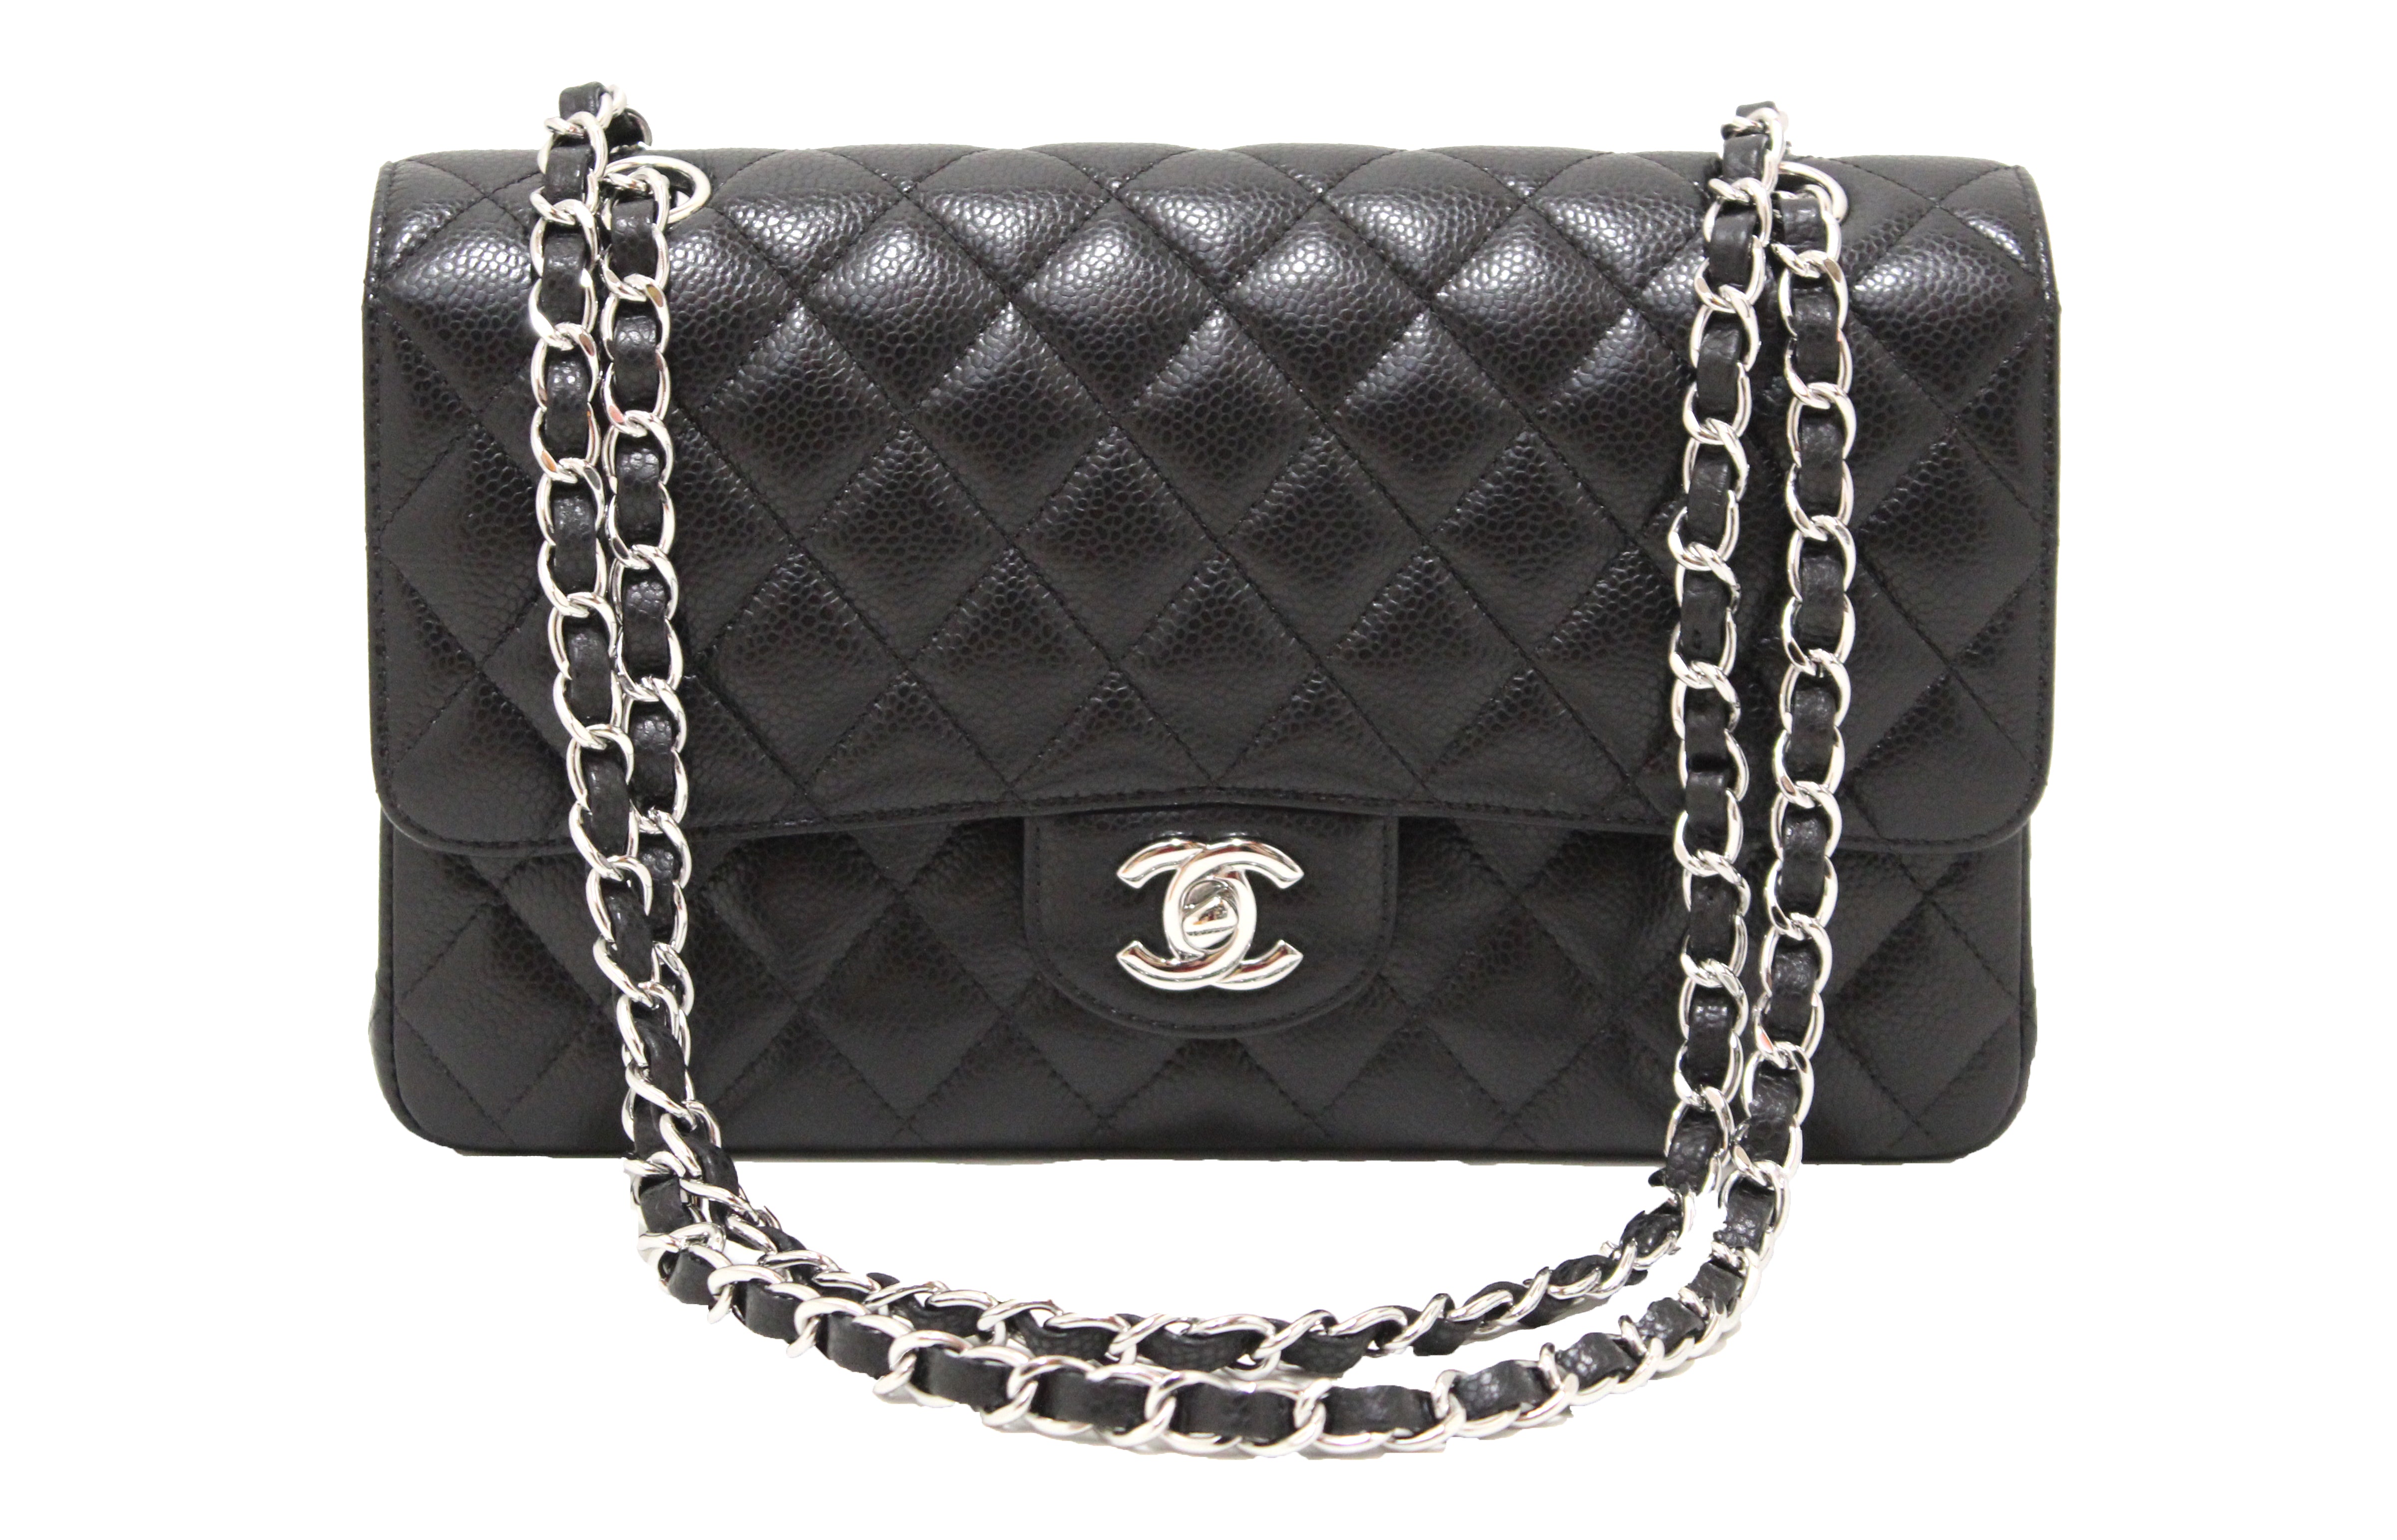 Authentic NEW Chanel Classic Black Quilted Caviar Leather Classic Medium Double Flap Bag